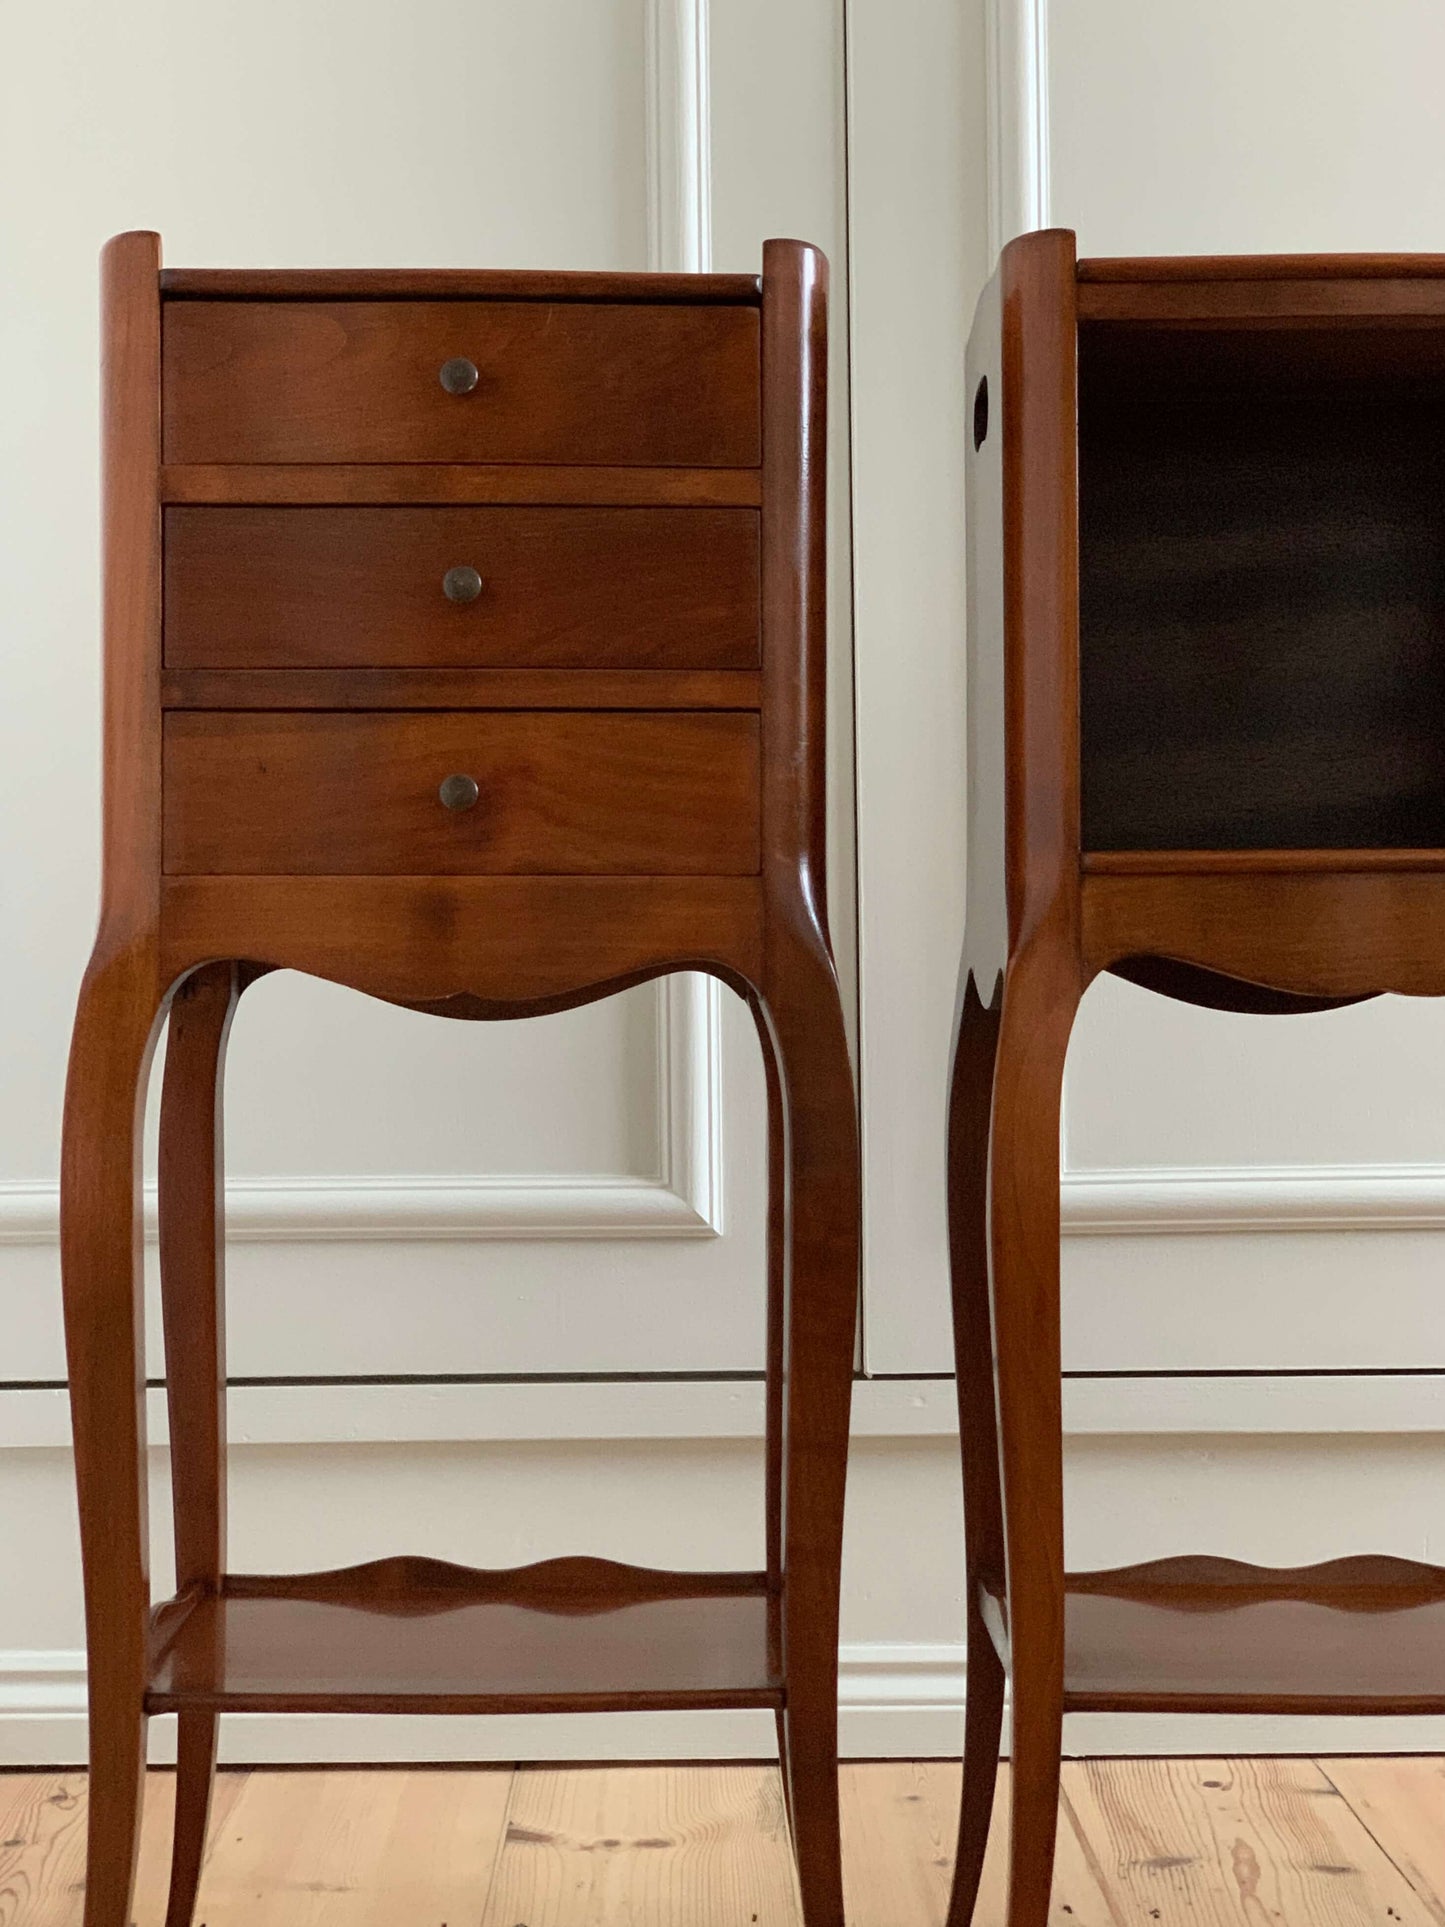 Pair of French vintage petite bedside tables